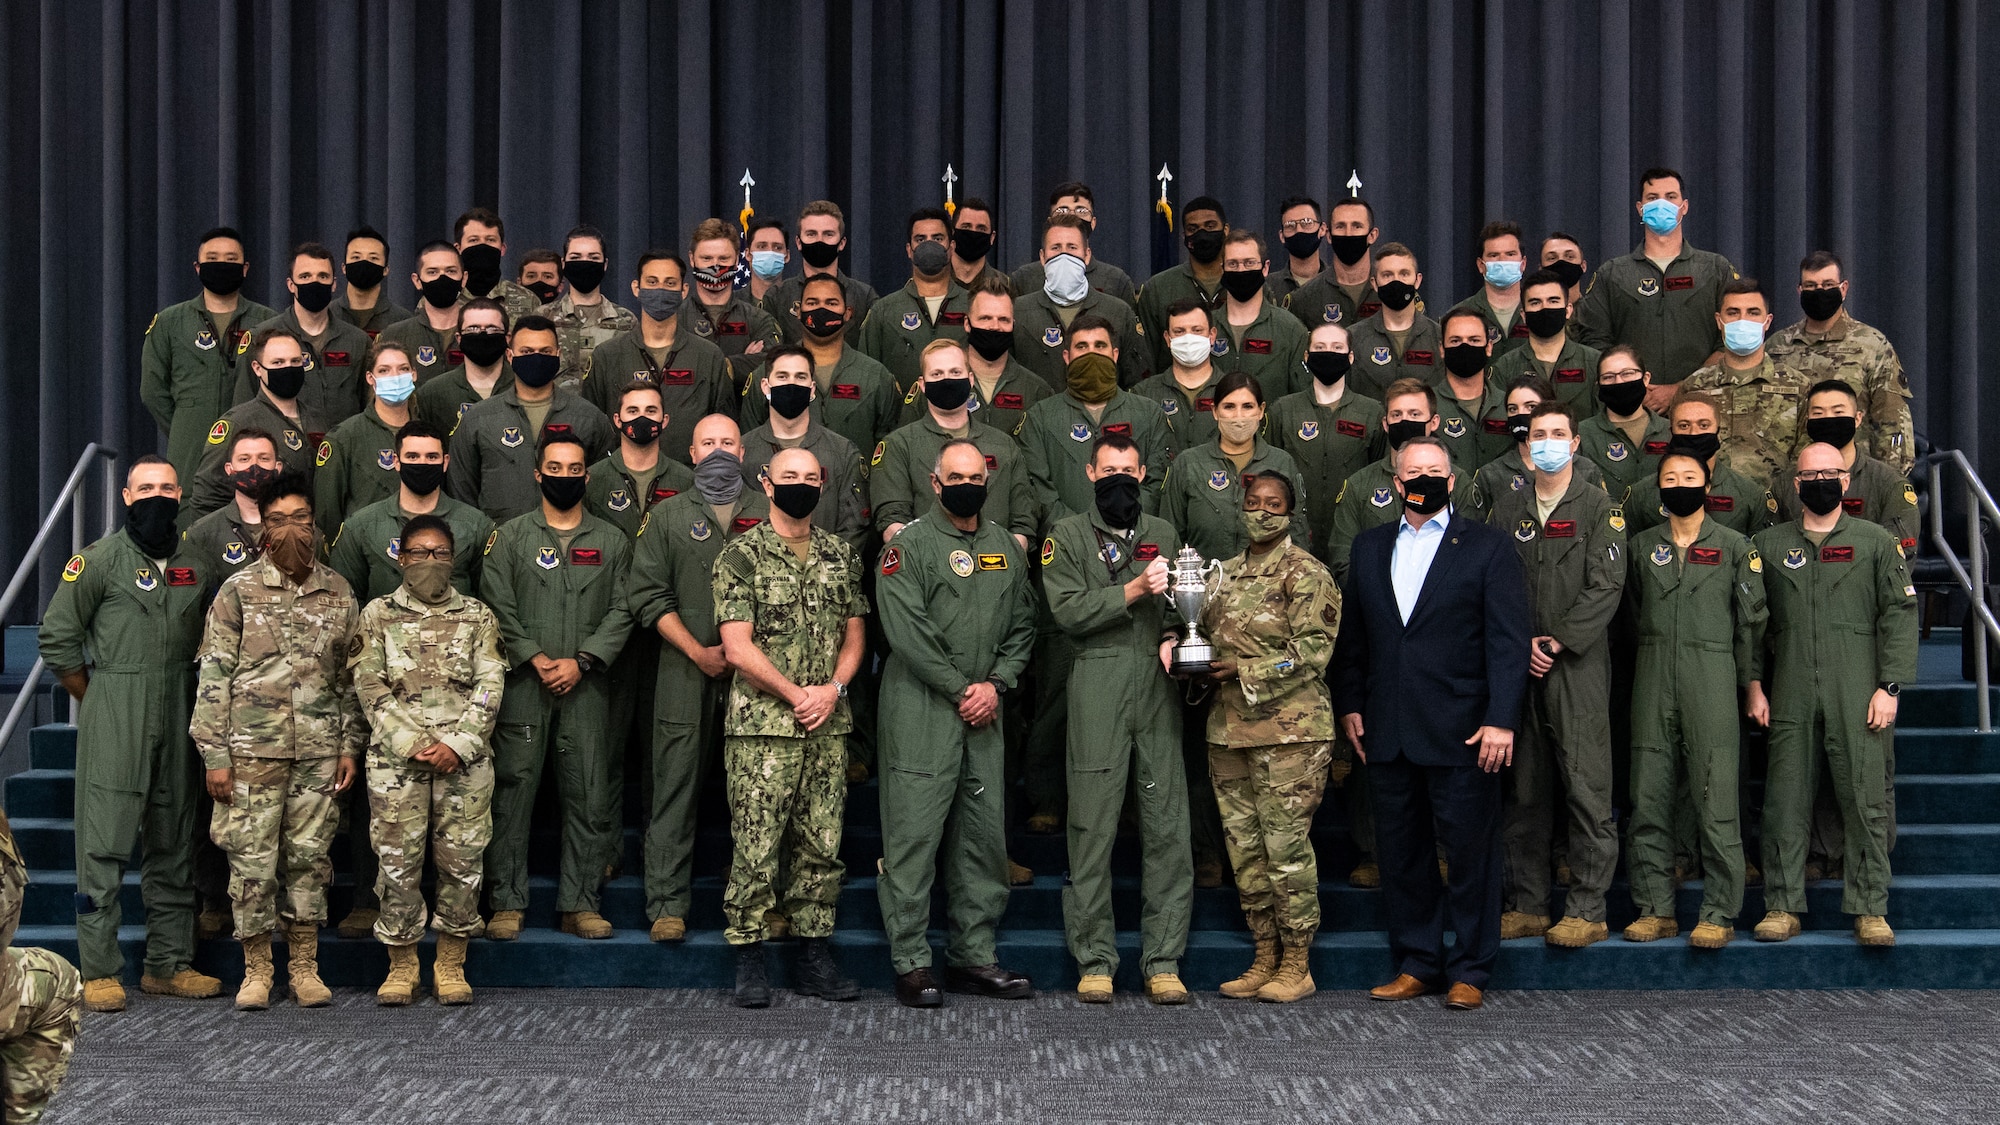 Leaders from U.S. Strategic Command, Strategic Command Consultation Committee and Airmen from the 96th Bomb Squadron pose for a photo with the Omaha Trophy at Barksdale Air Force Base, Louisiana, March 30, 2021. The Omaha Trophy is awarded each year to various units in recognition of outstanding support to USSTRATCOM's strategic deterrence mission. (U.S. Air Force photo by Airman 1st Class Jacob B. Wrightsman)